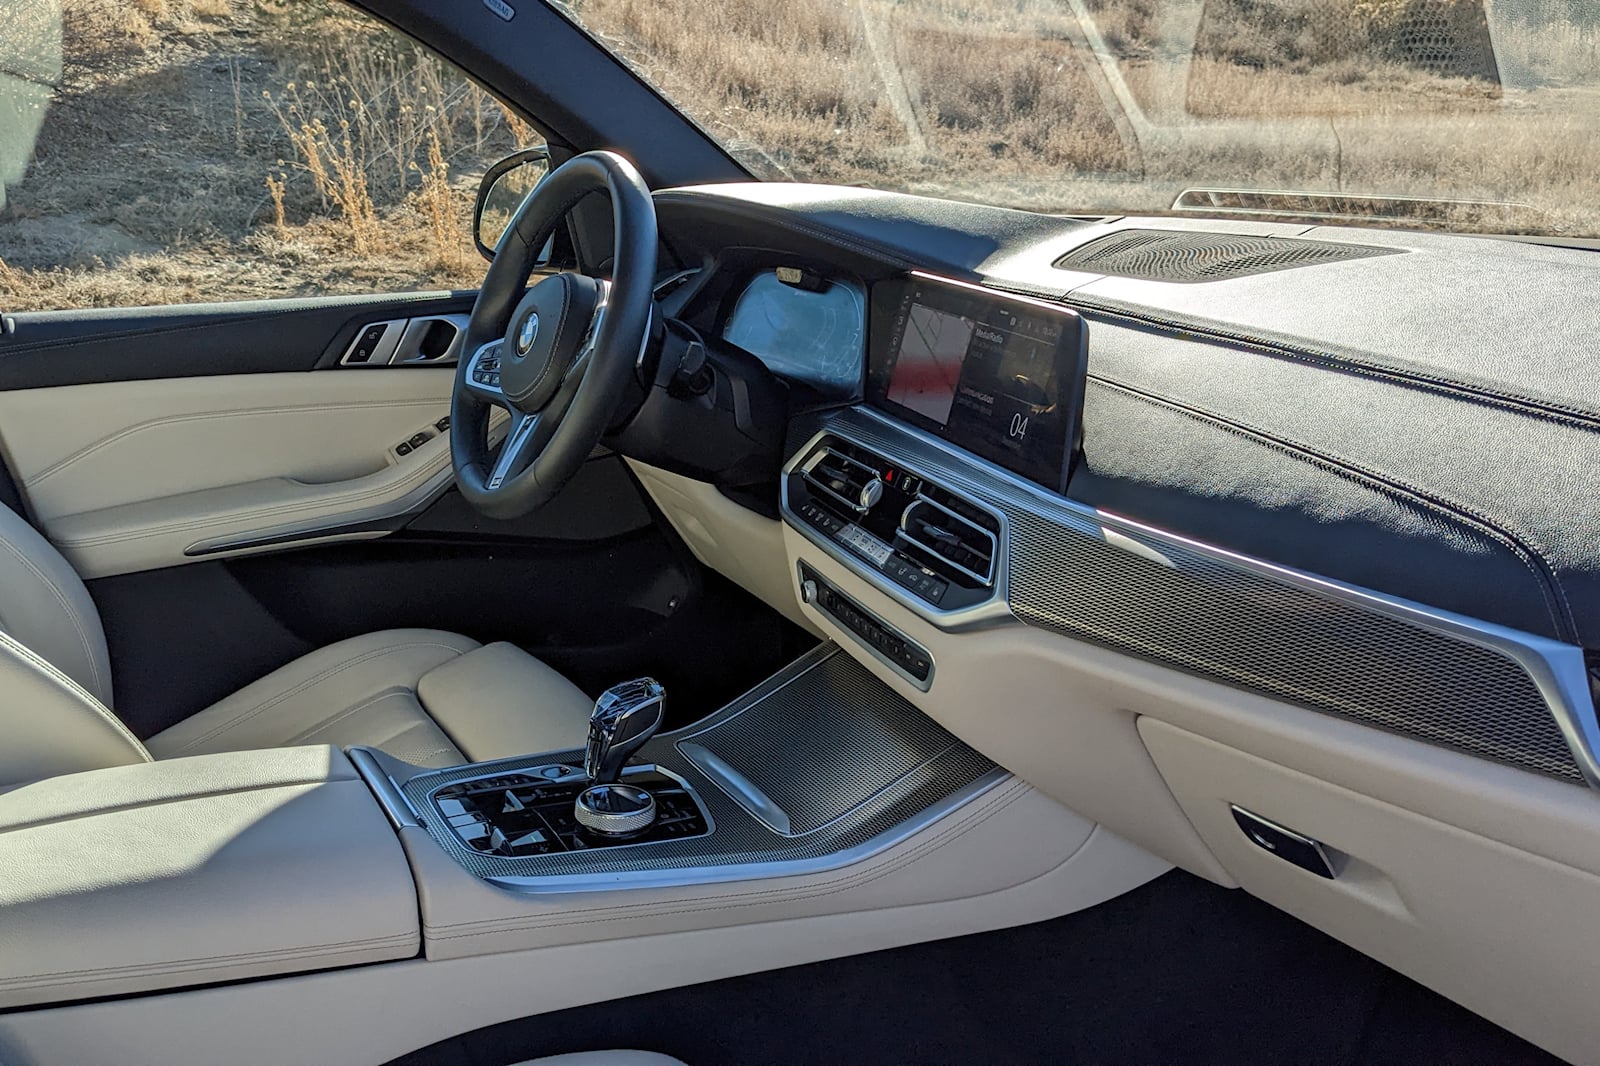 2023 BMW X5 Interior Dimensions: Seating, Cargo Space & Trunk Size - Photos